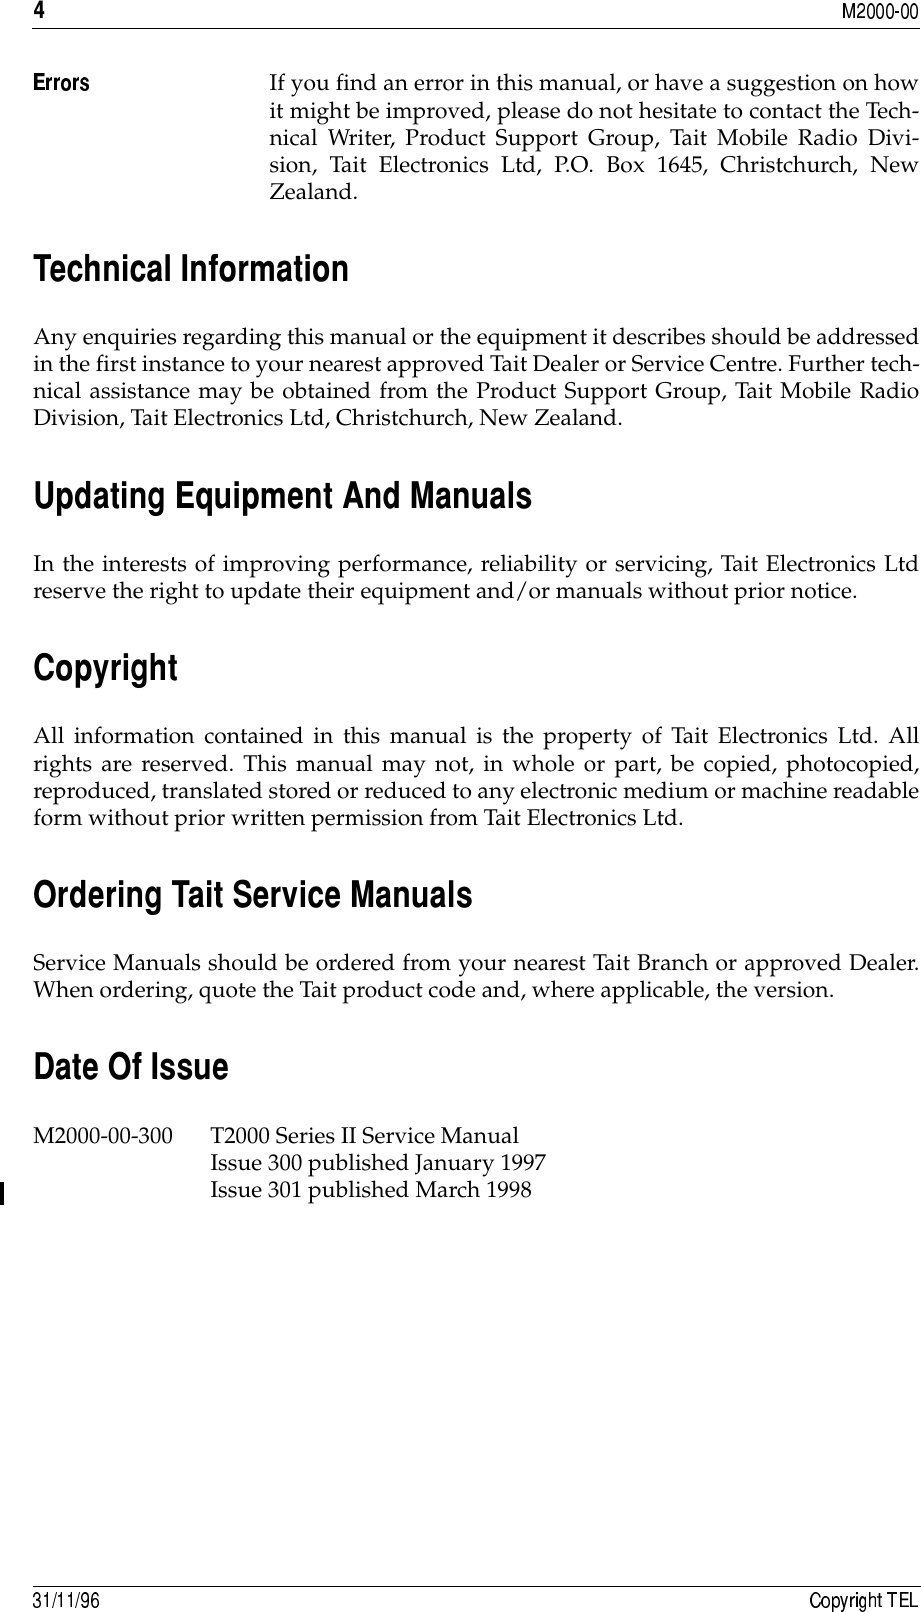 &quot;If you find an error in this manual, or have a suggestion on howit might be improved, please do not hesitate to contact the Tech-nical Writer, Product Support Group, Tait Mobile Radio Divi-sion, Tait Electronics Ltd, P.O. Box 1645, Christchurch, NewZealand.##$Any enquiries regarding this manual or the equipment it describes should be addressedin the first instance to your nearest approved Tait Dealer or Service Centre. Further tech-nical assistance may be obtained from the Product Support Group, Tait Mobile RadioDivision, Tait Electronics Ltd, Christchurch, New Zealand.%&amp;&apos;(&amp;!In the interests of improving performance, reliability or servicing, Tait Electronics Ltdreserve the right to update their equipment and/or manuals without prior notice.)&amp;All information contained in this manual is the property of Tait Electronics Ltd. Allrights are reserved. This manual may not, in whole or part, be copied, photocopied,reproduced, translated stored or reduced to any electronic medium or machine readableform without prior written permission from Tait Electronics Ltd.*#Service Manuals should be ordered from your nearest Tait Branch or approved Dealer.When ordering, quote the Tait product code and, where applicable, the version.*$M2000-00-300 T2000 Series II Service Manual Issue 300 published January 1997Issue 301 published March 1998